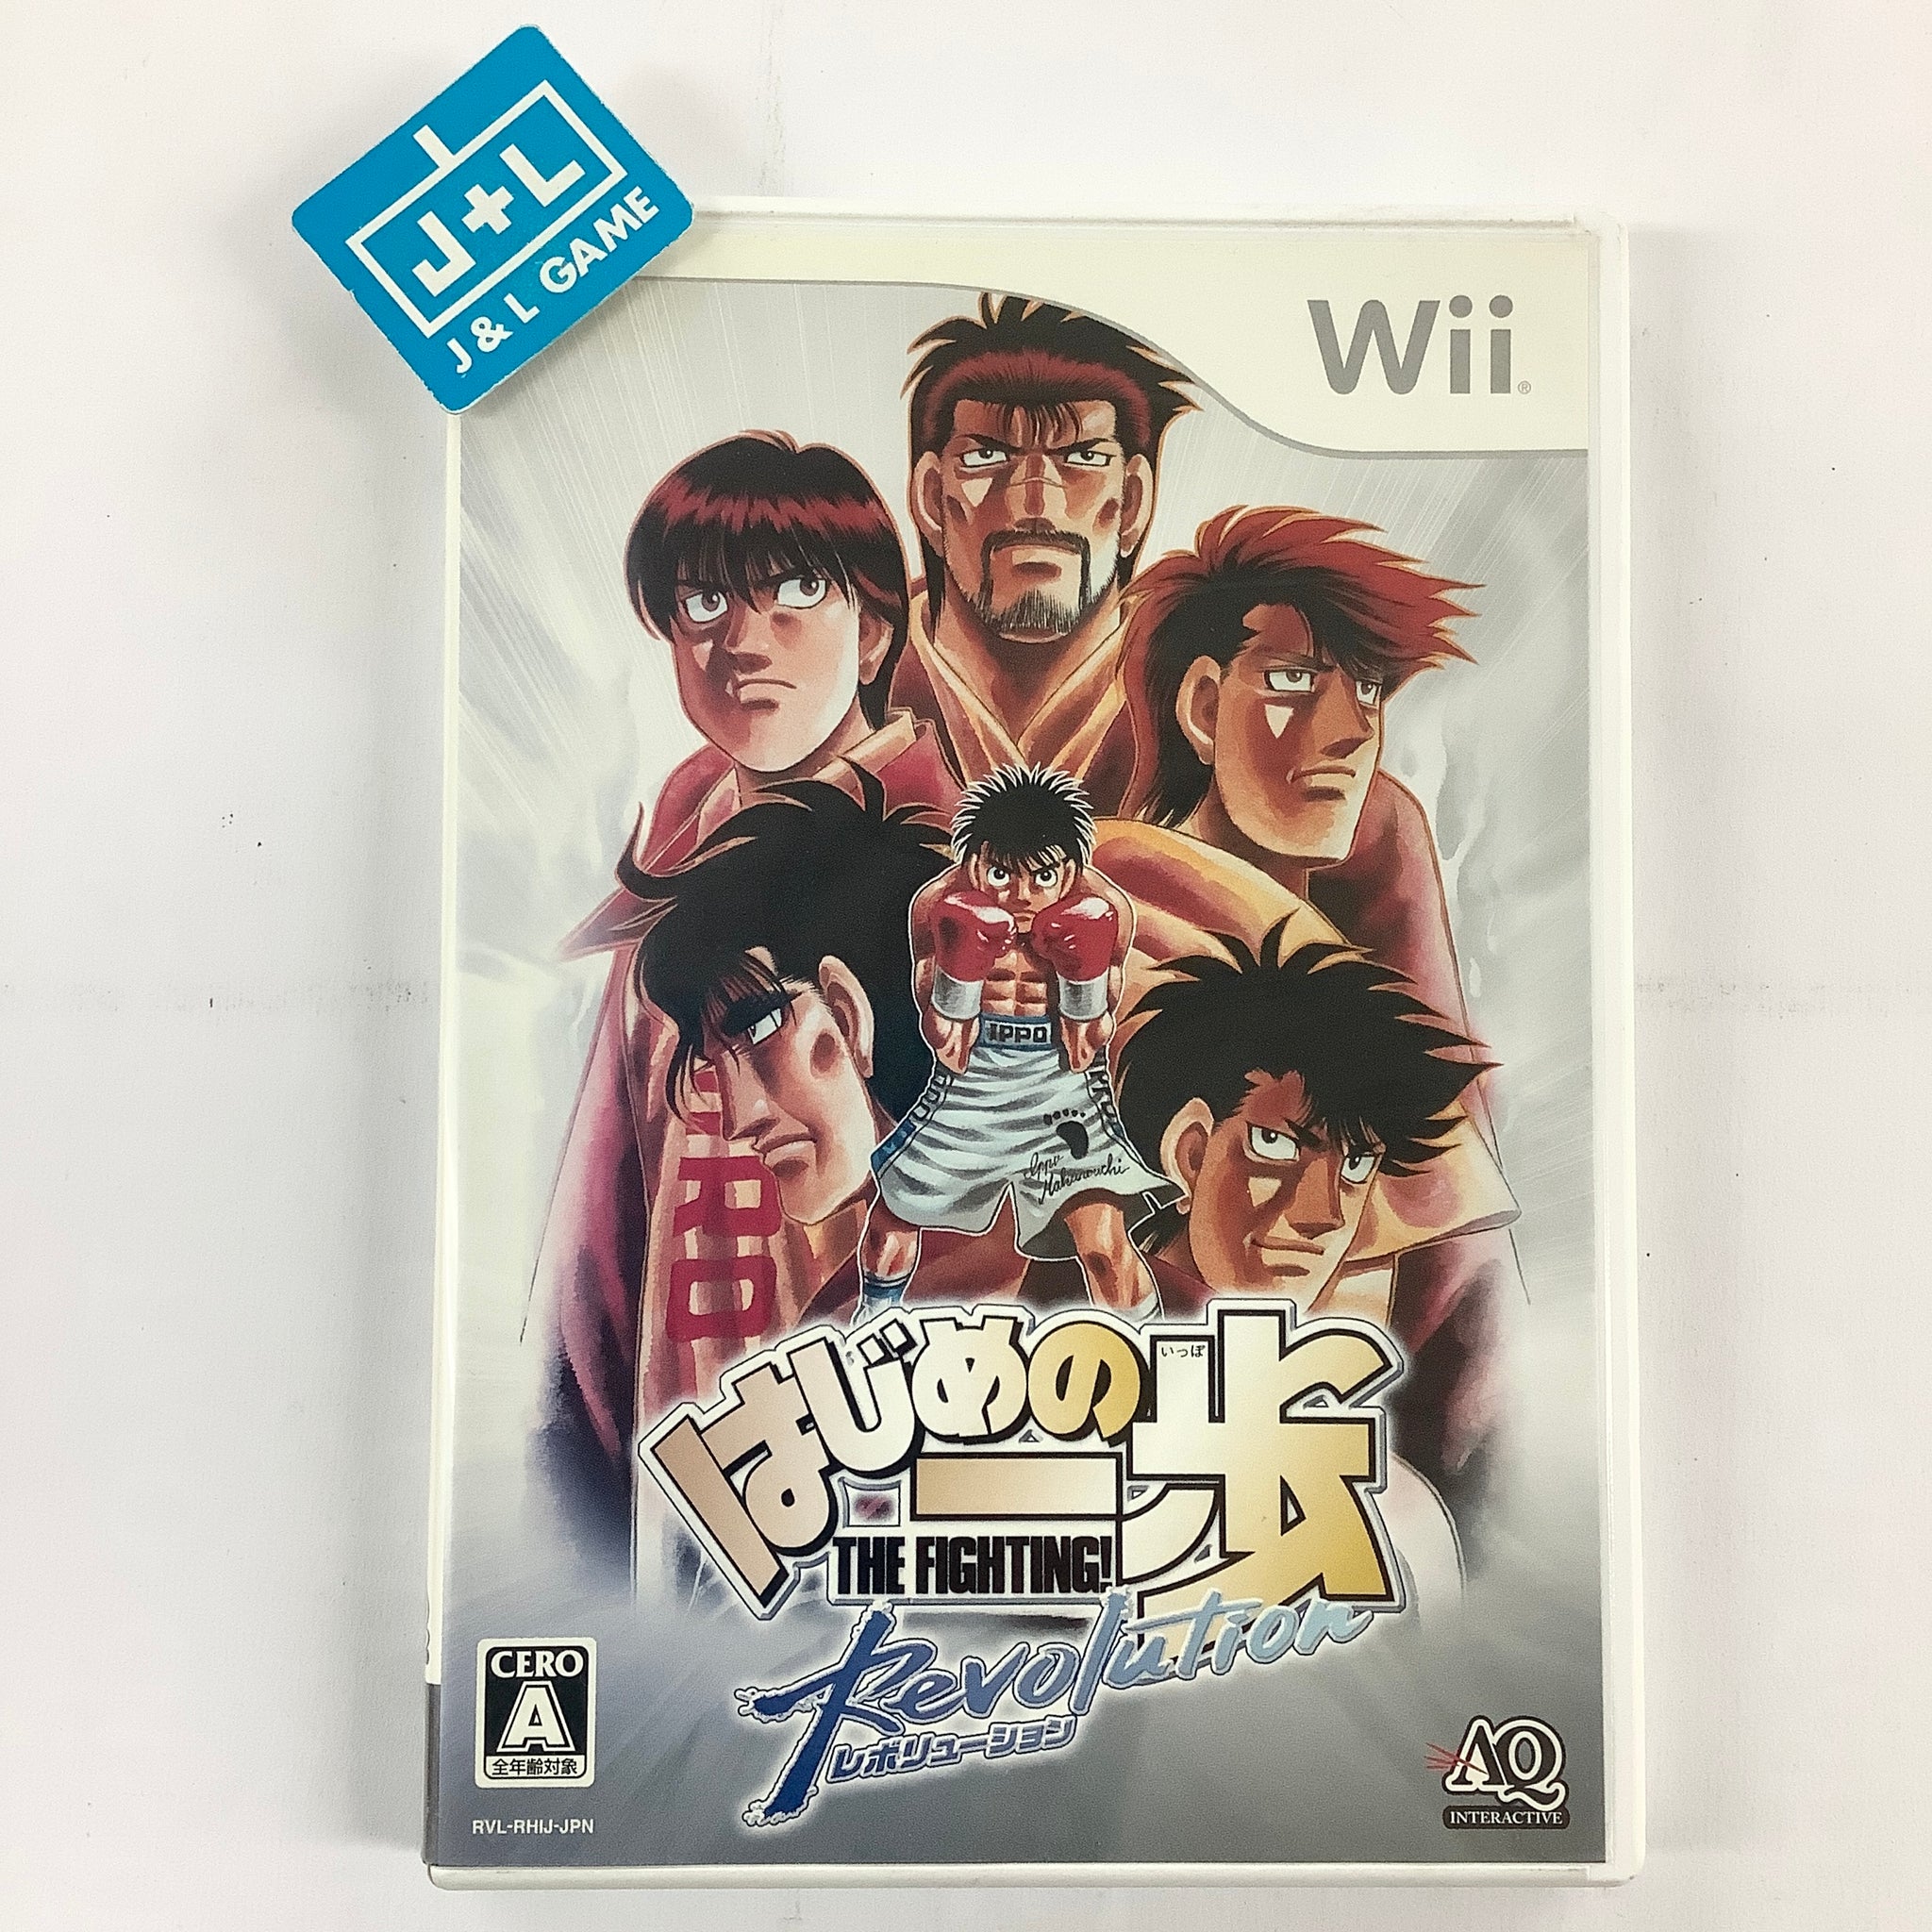 Hajime no Ippo: Victorious Boxers Import Sony PlayStation 2 Game